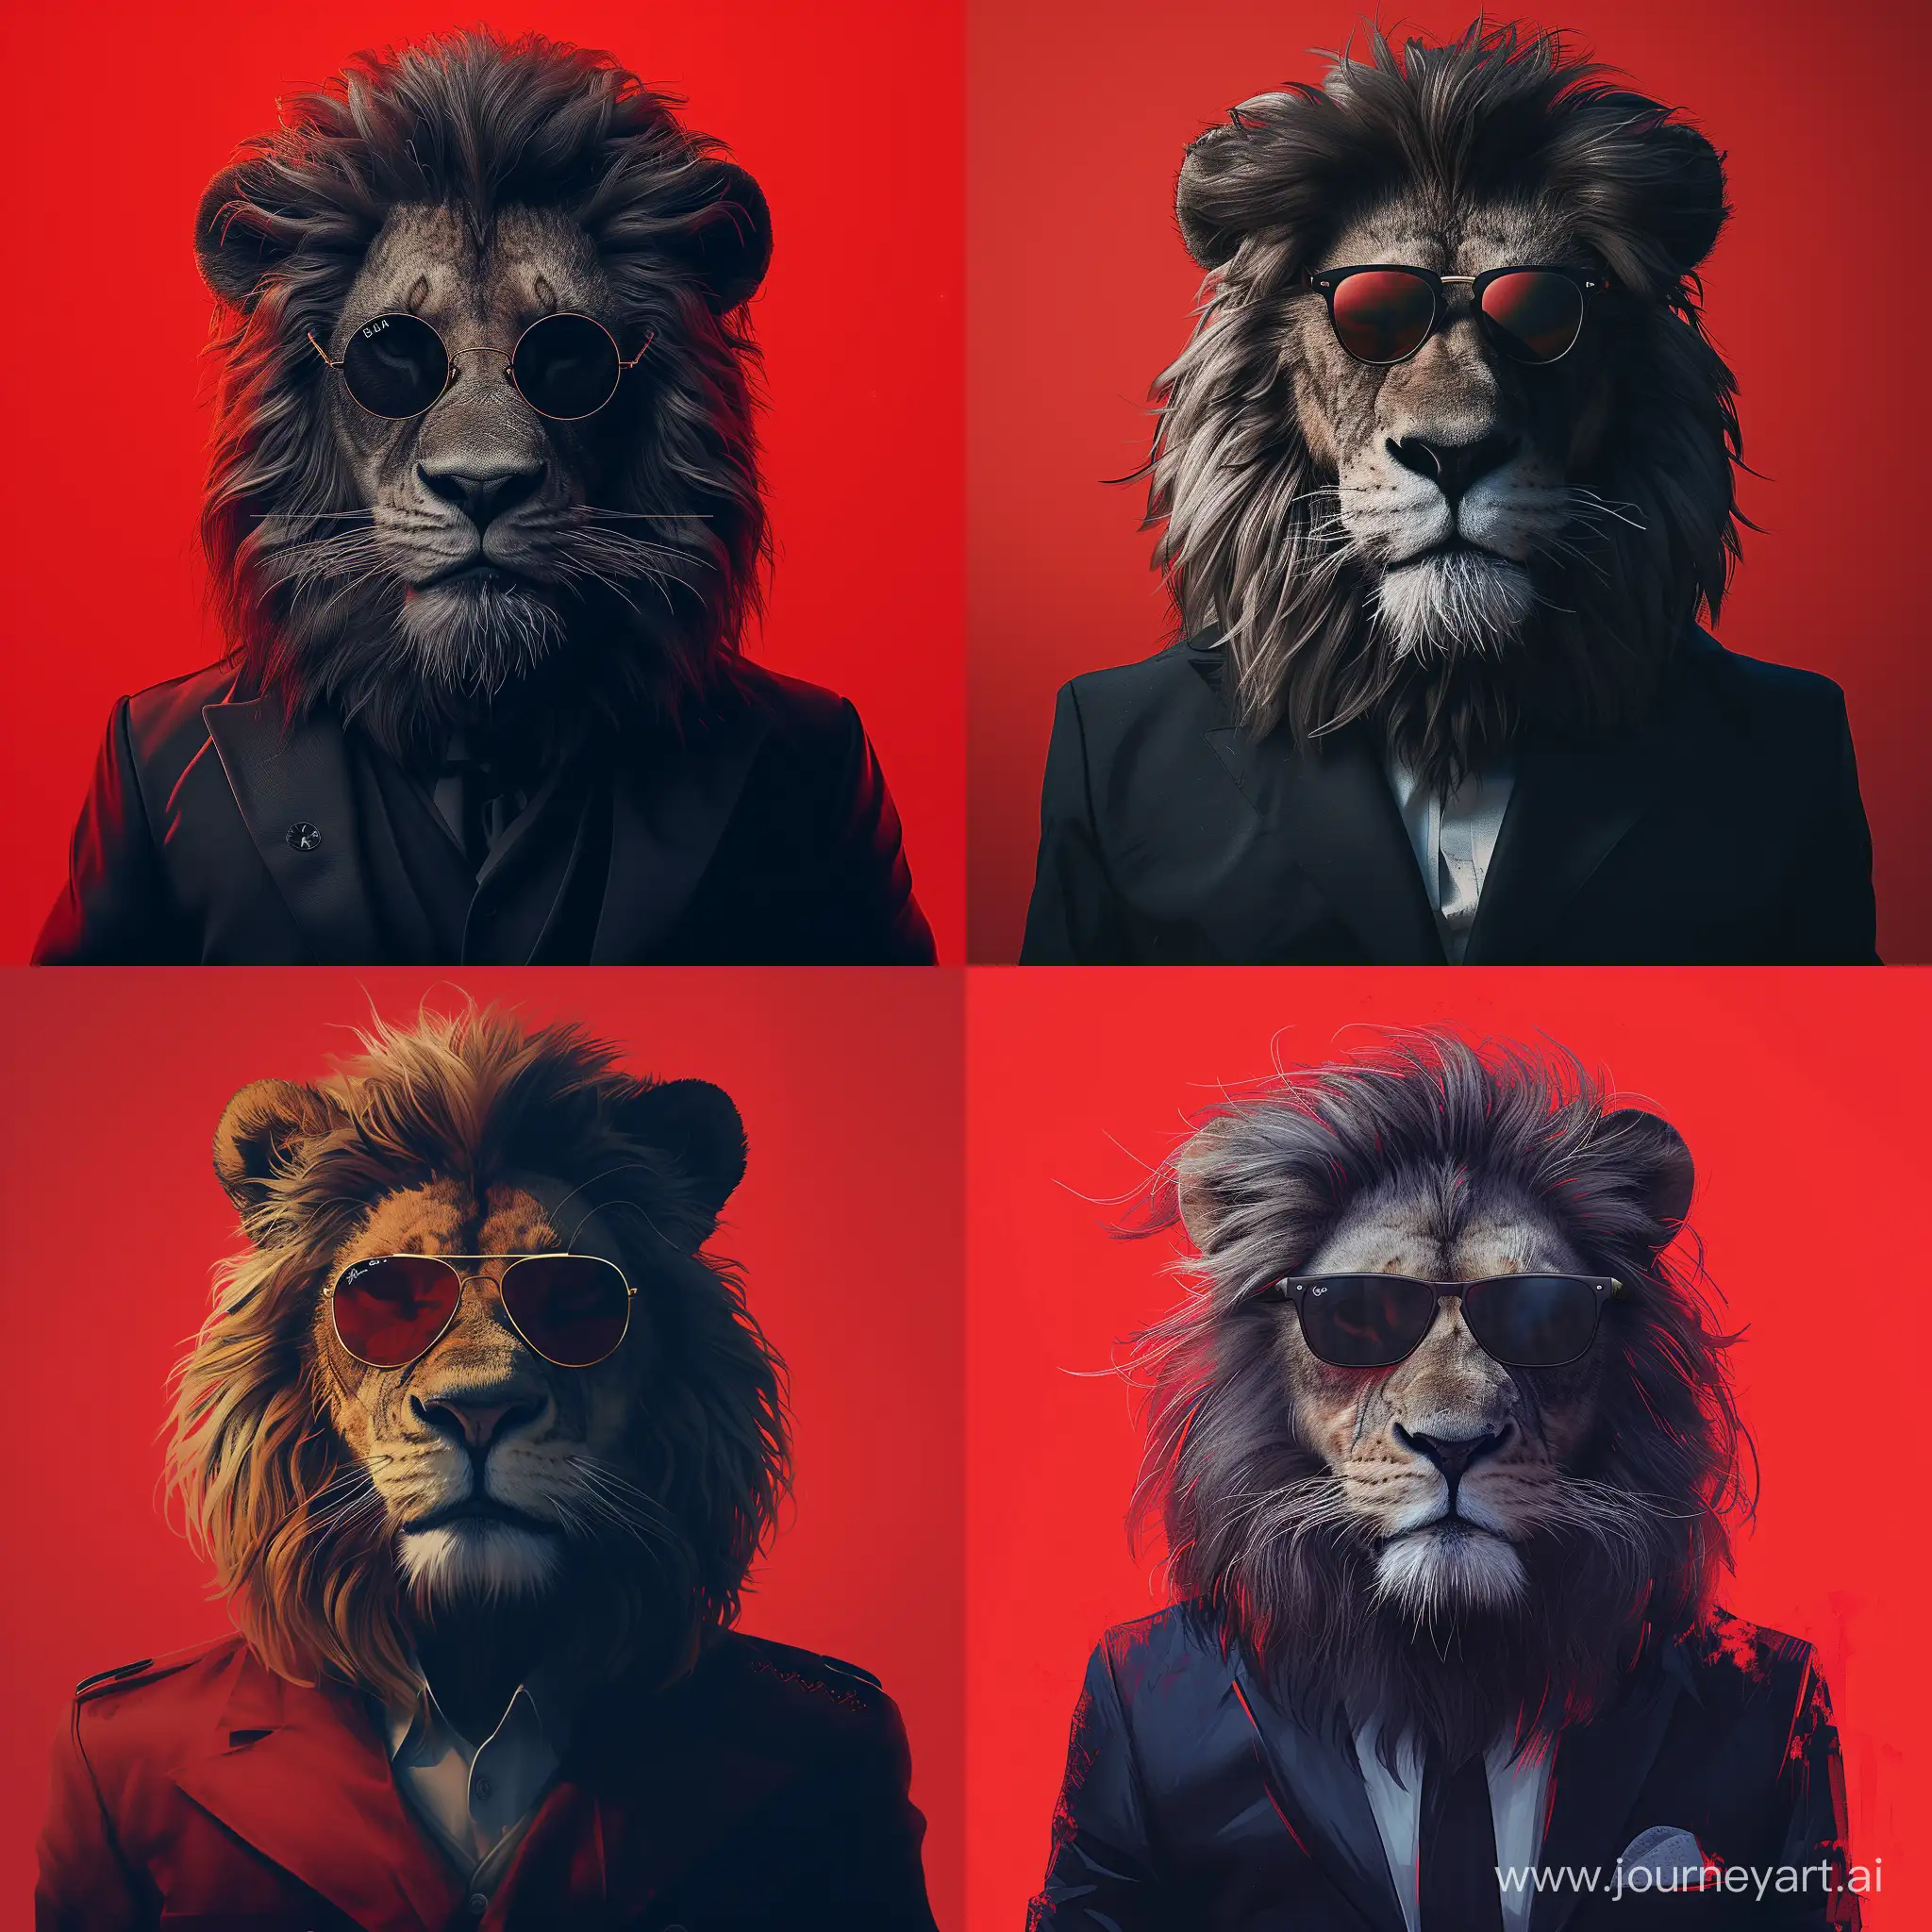 Dapper-Lion-in-Formal-Attire-and-Sunglasses-on-Red-Background